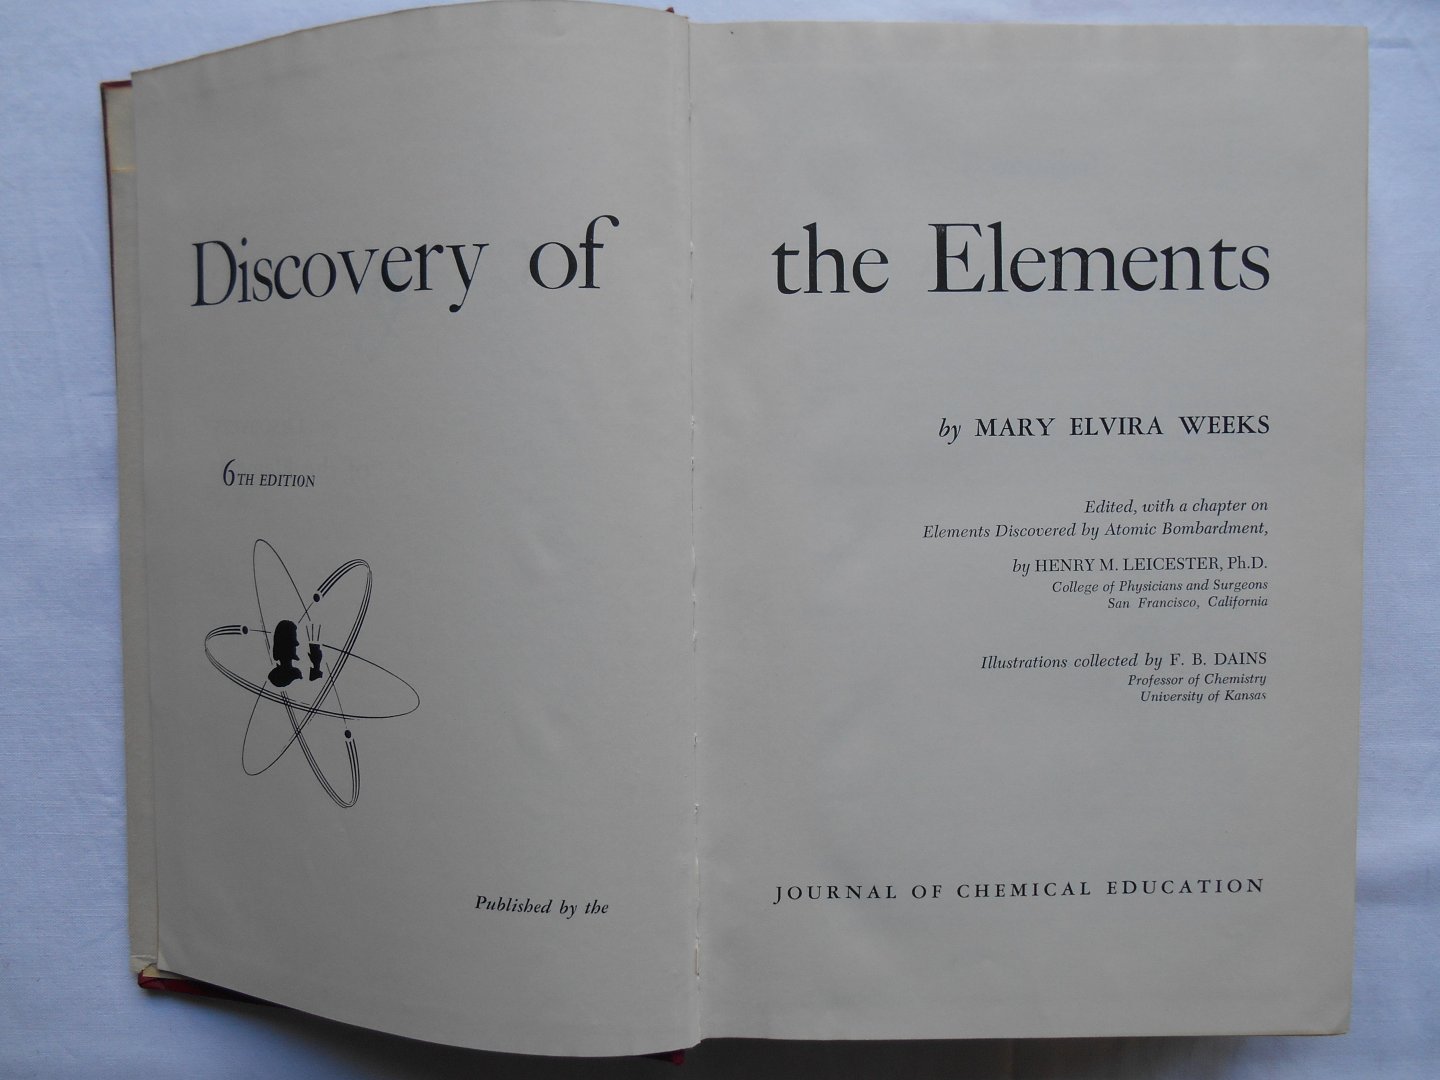 Weeks, Mary Elvira - Discovery of the elements